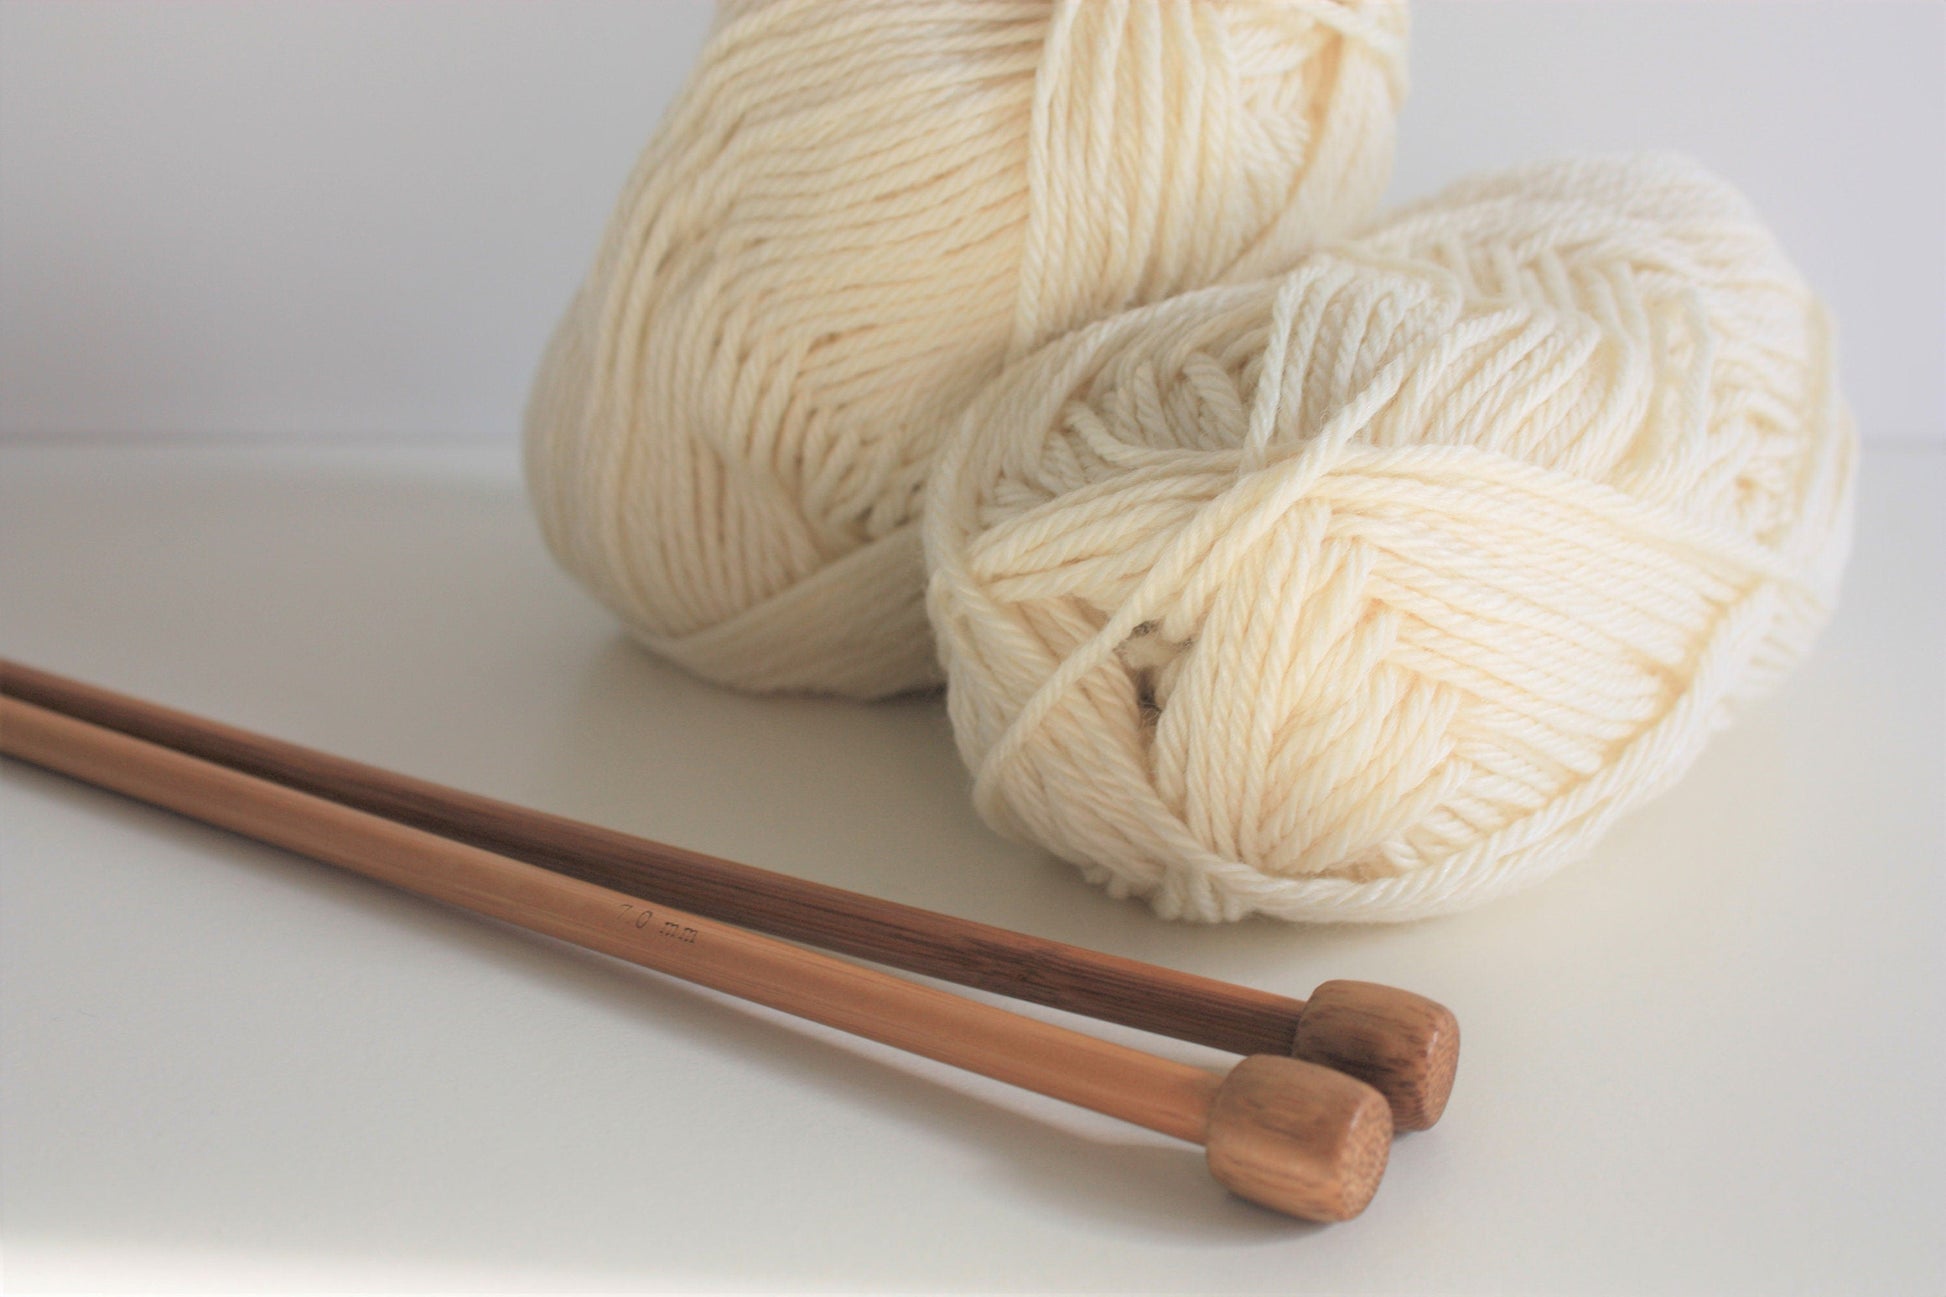 Best worsted weight yarns - Gathered